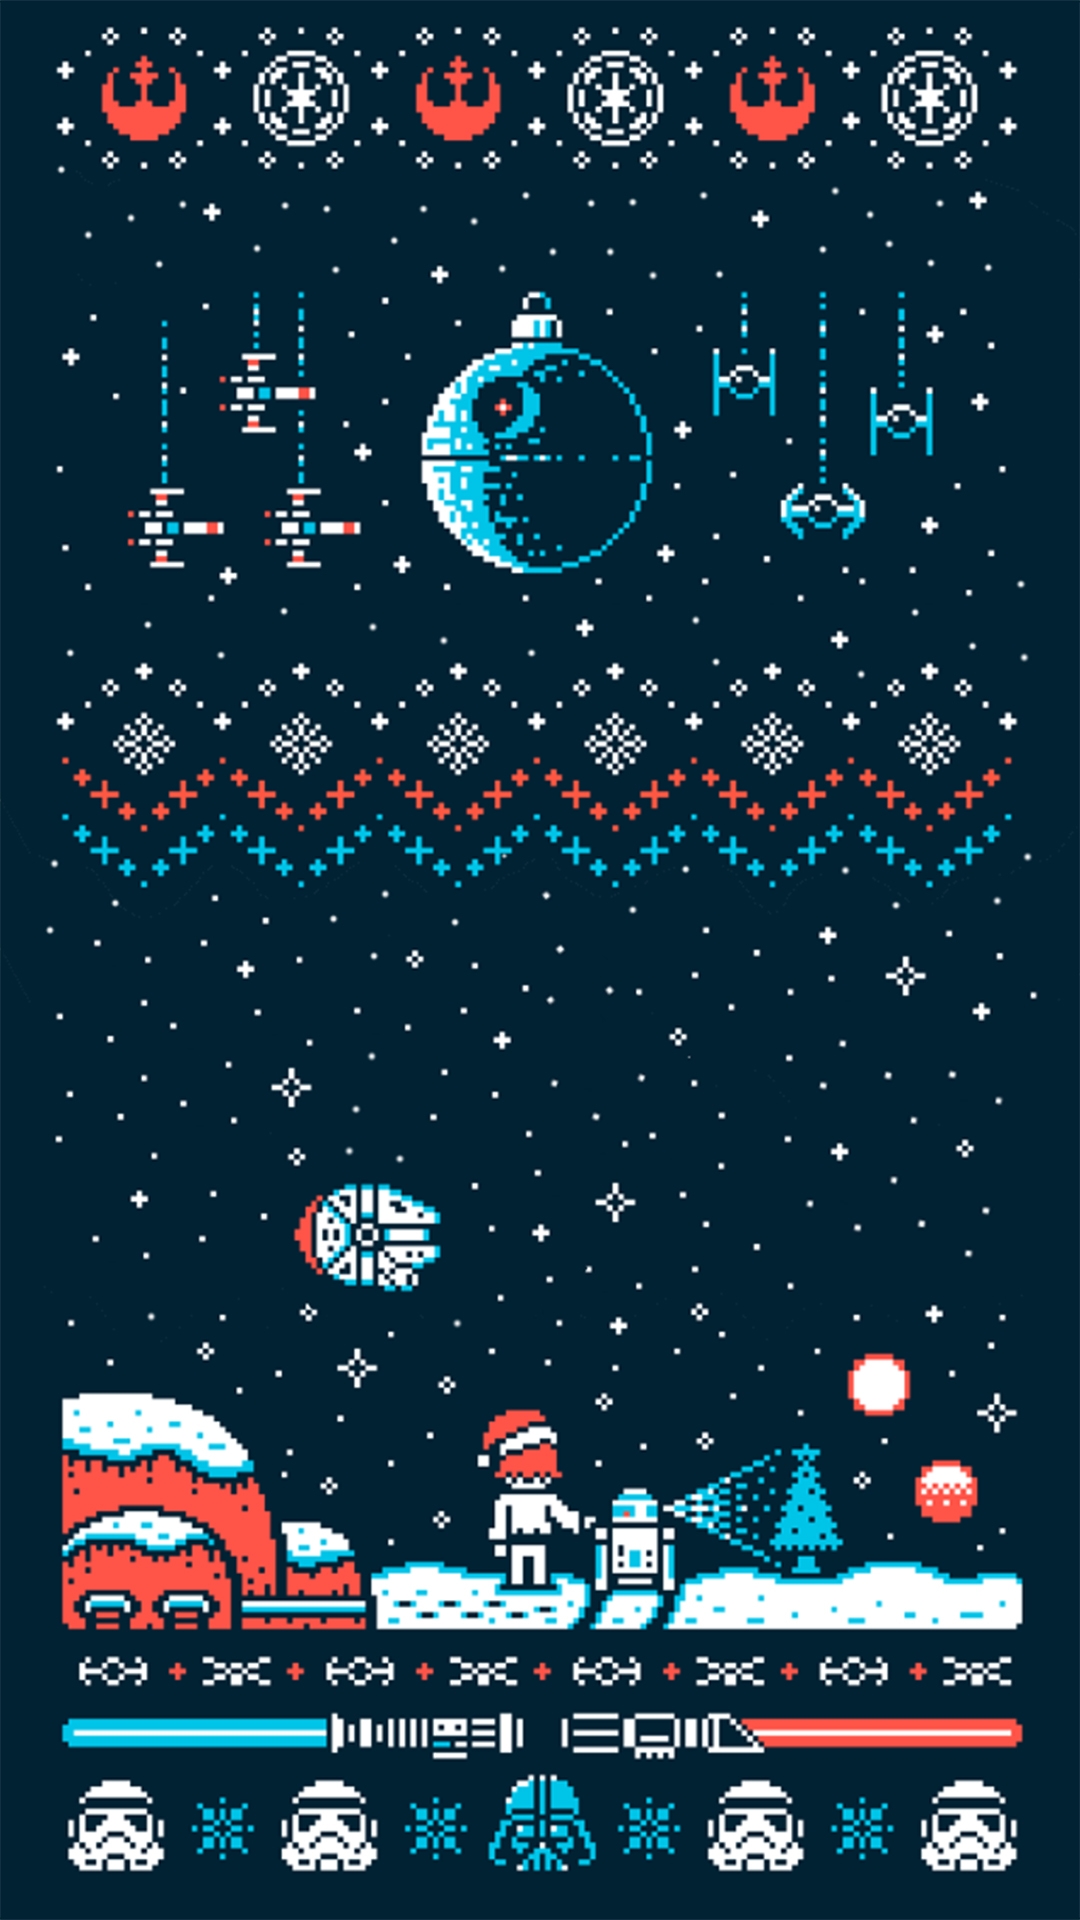 Christmas Wallpaper For iPhone Cute And Vintage Background